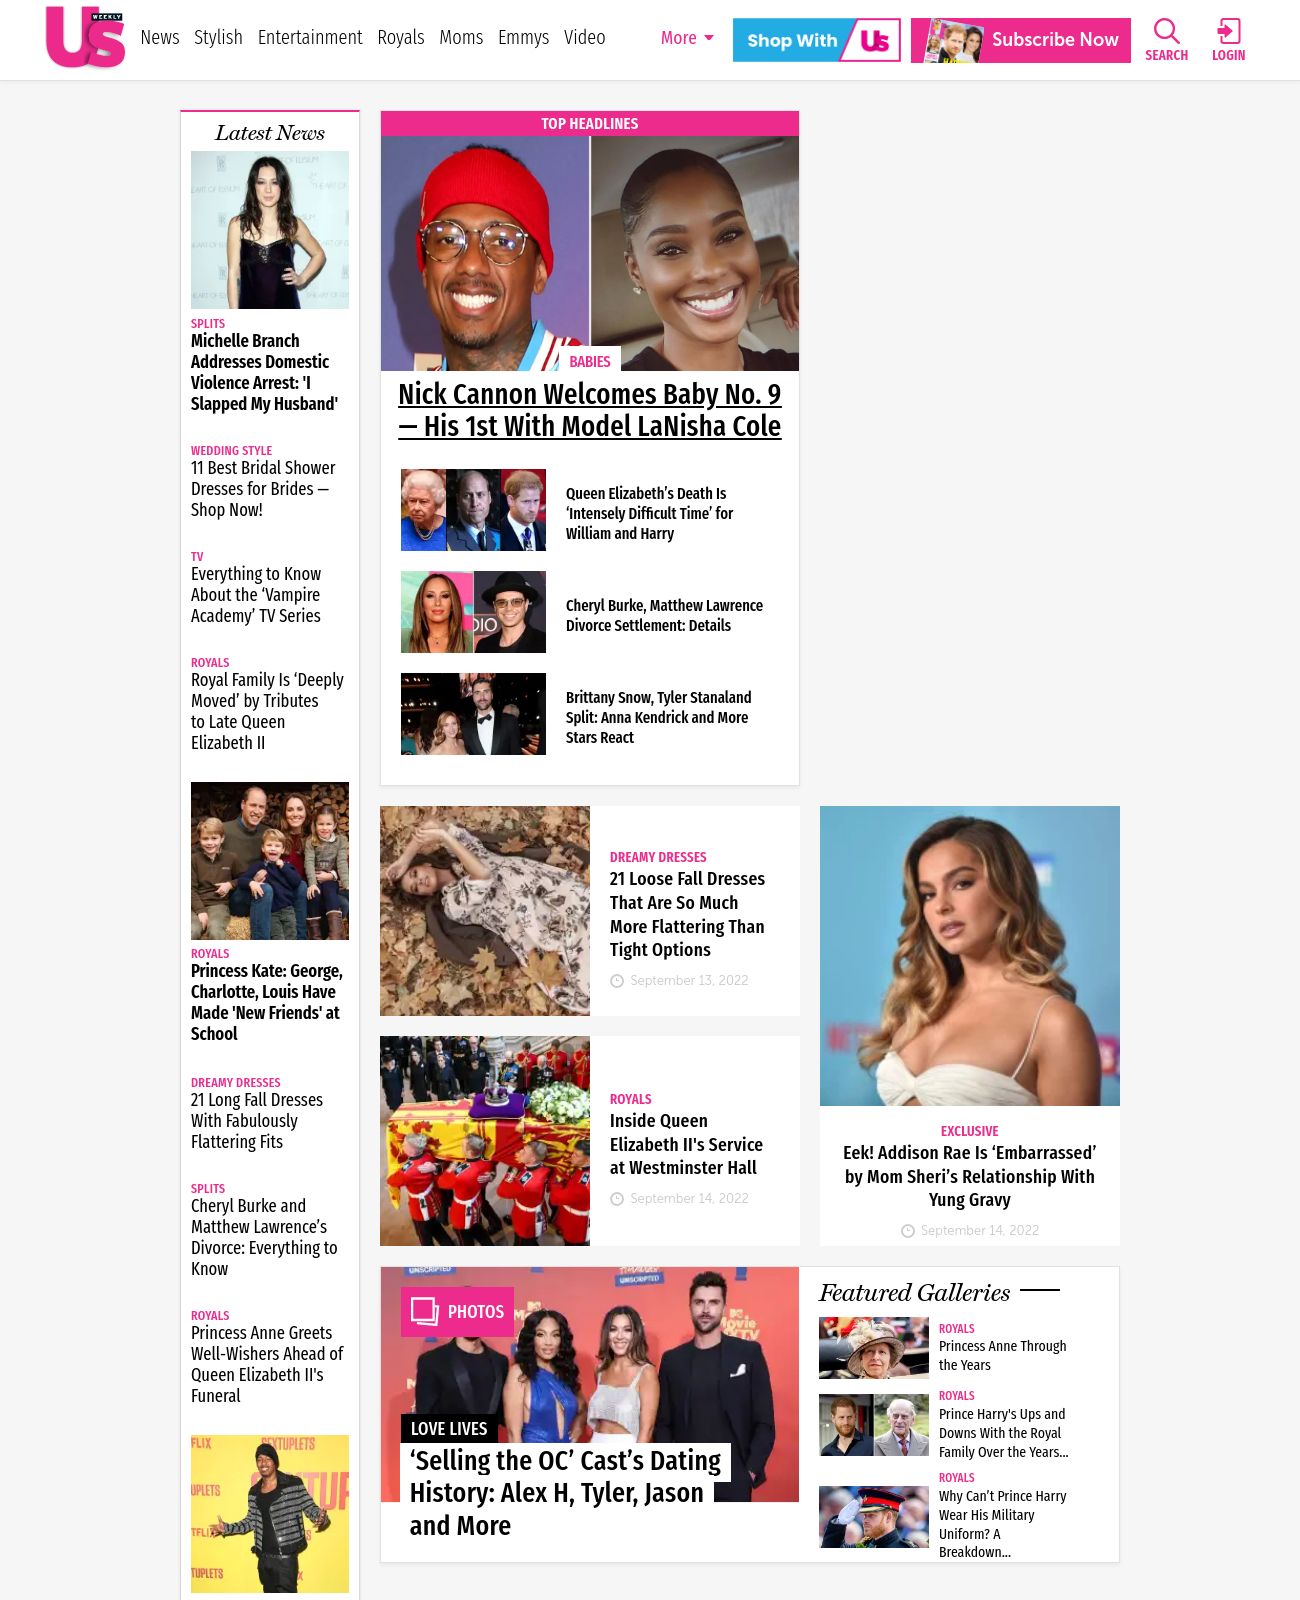 Us Weekly at 2022-09-15 13:16:40-04:00 local time